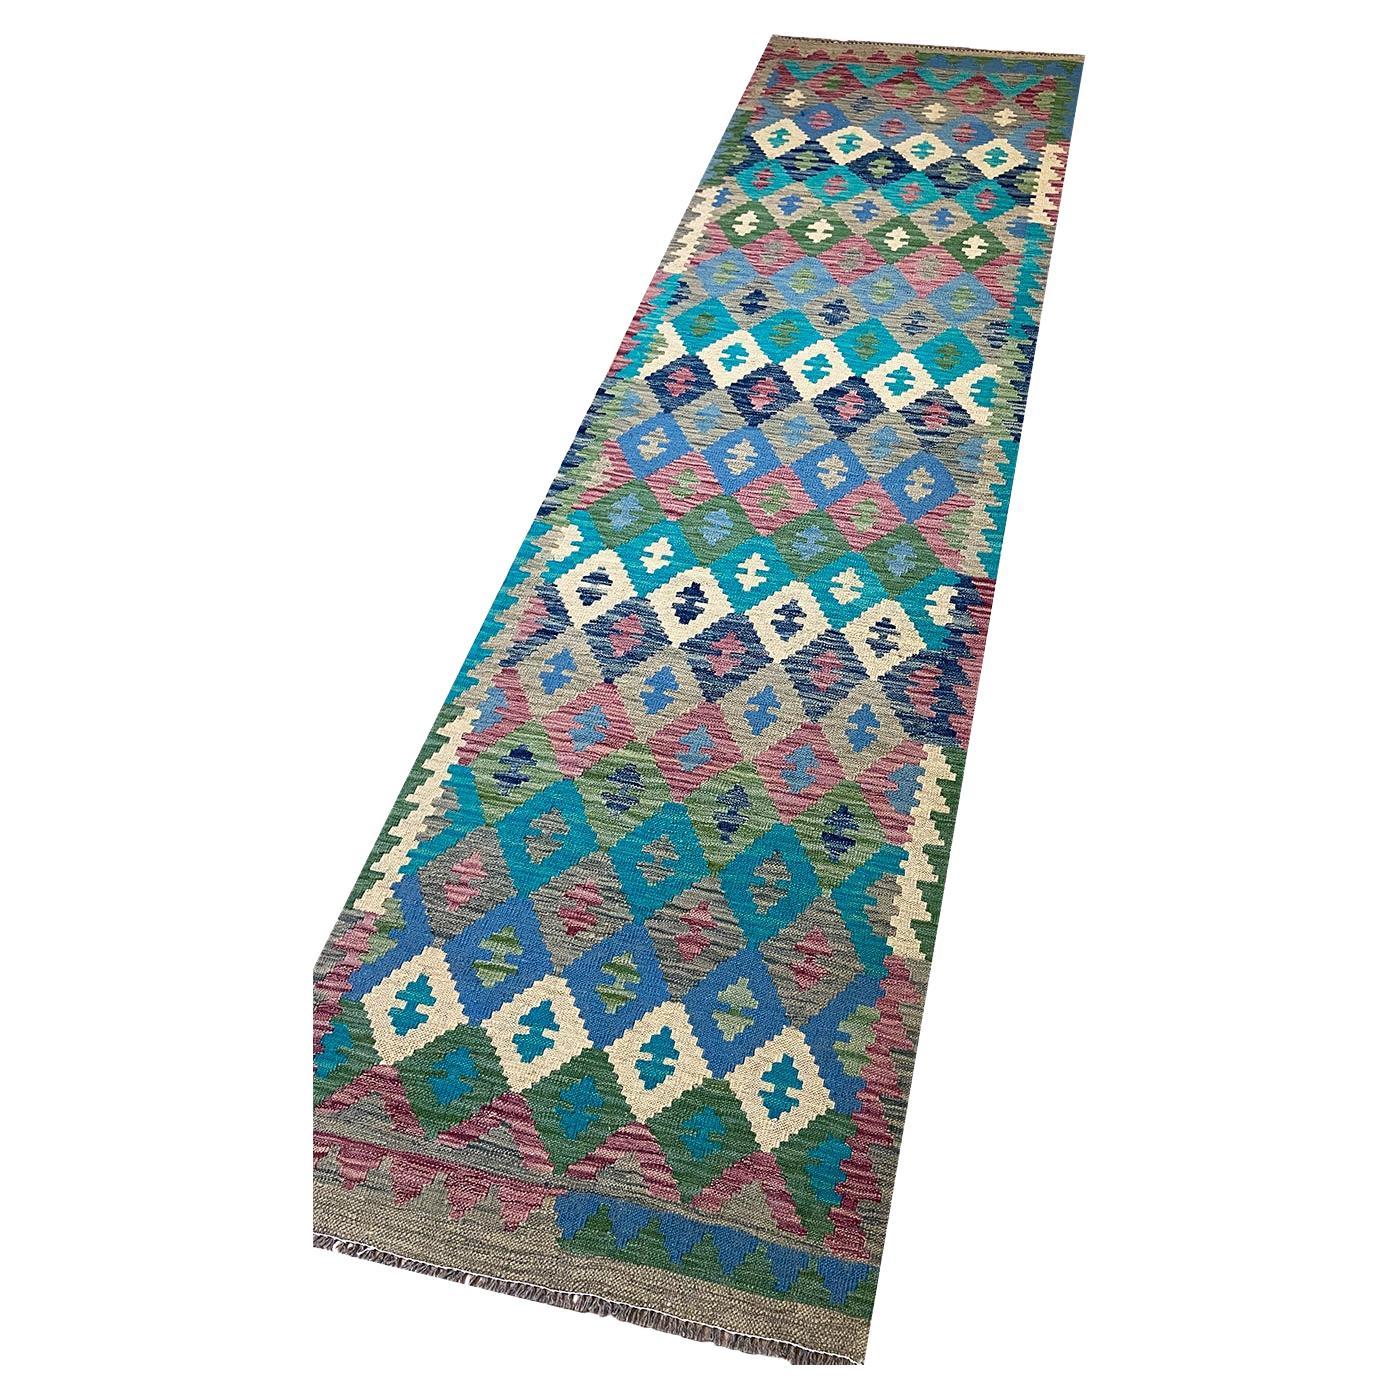 All Wool Colorful Kilim Runner 2′ 10″ x 9′ 7″ For Sale